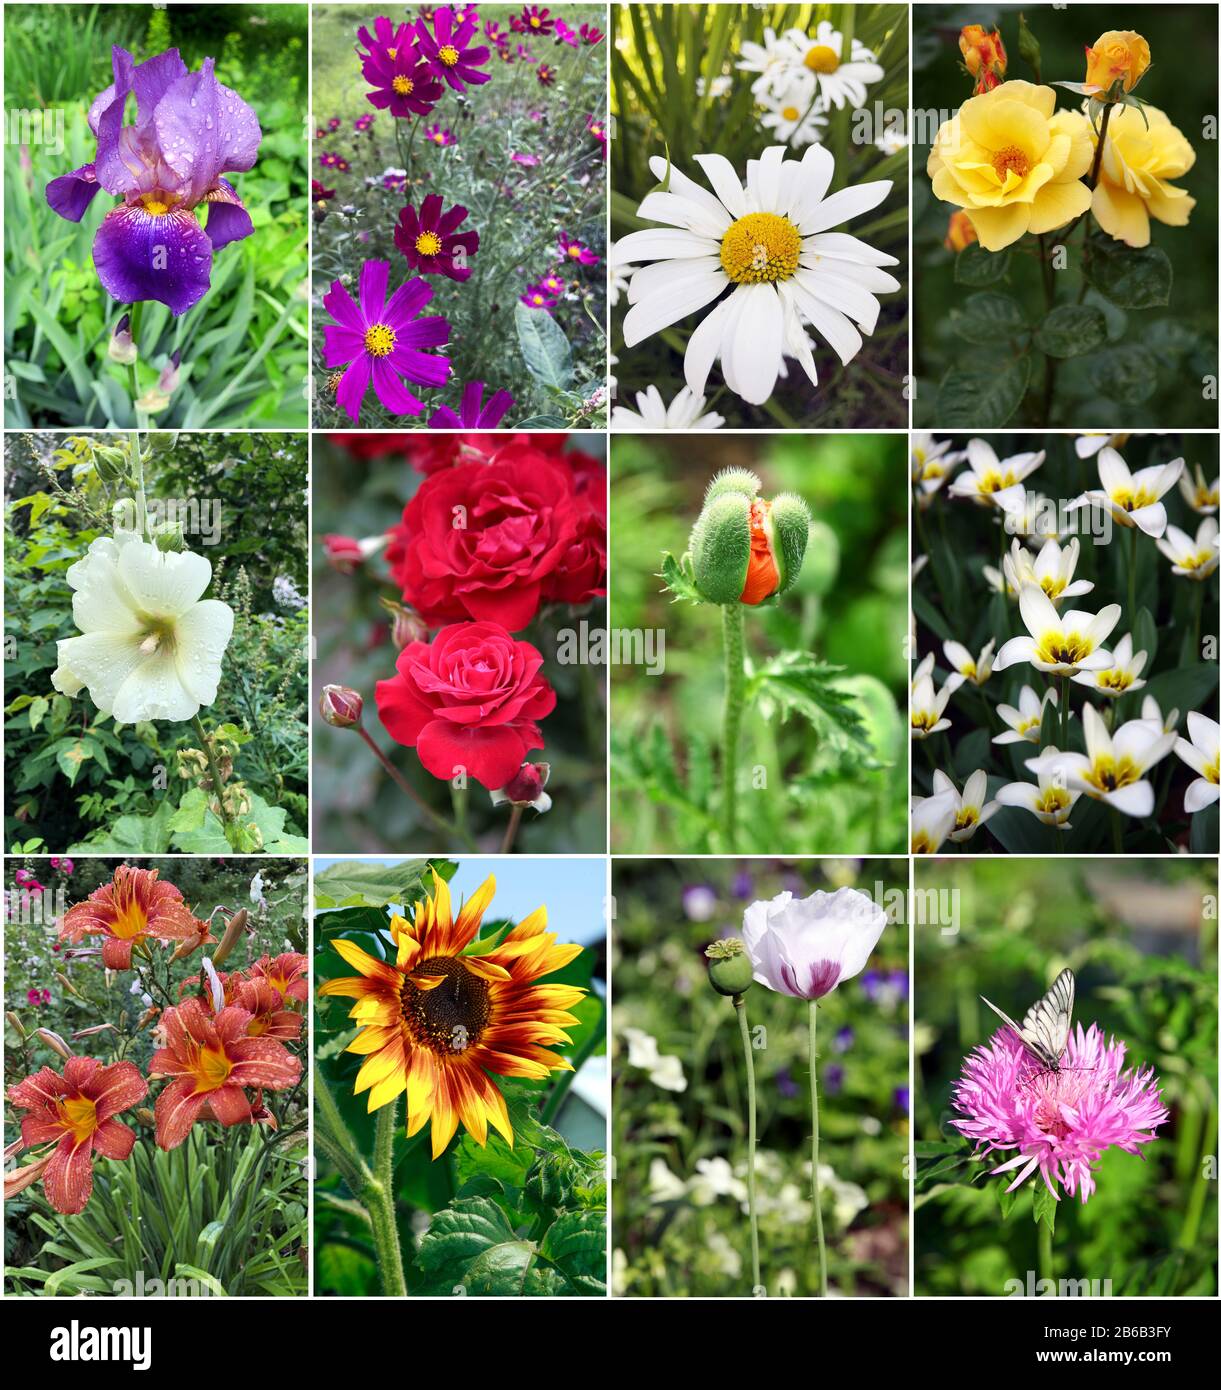 Collage of various spring and summer flowers Stock Photo